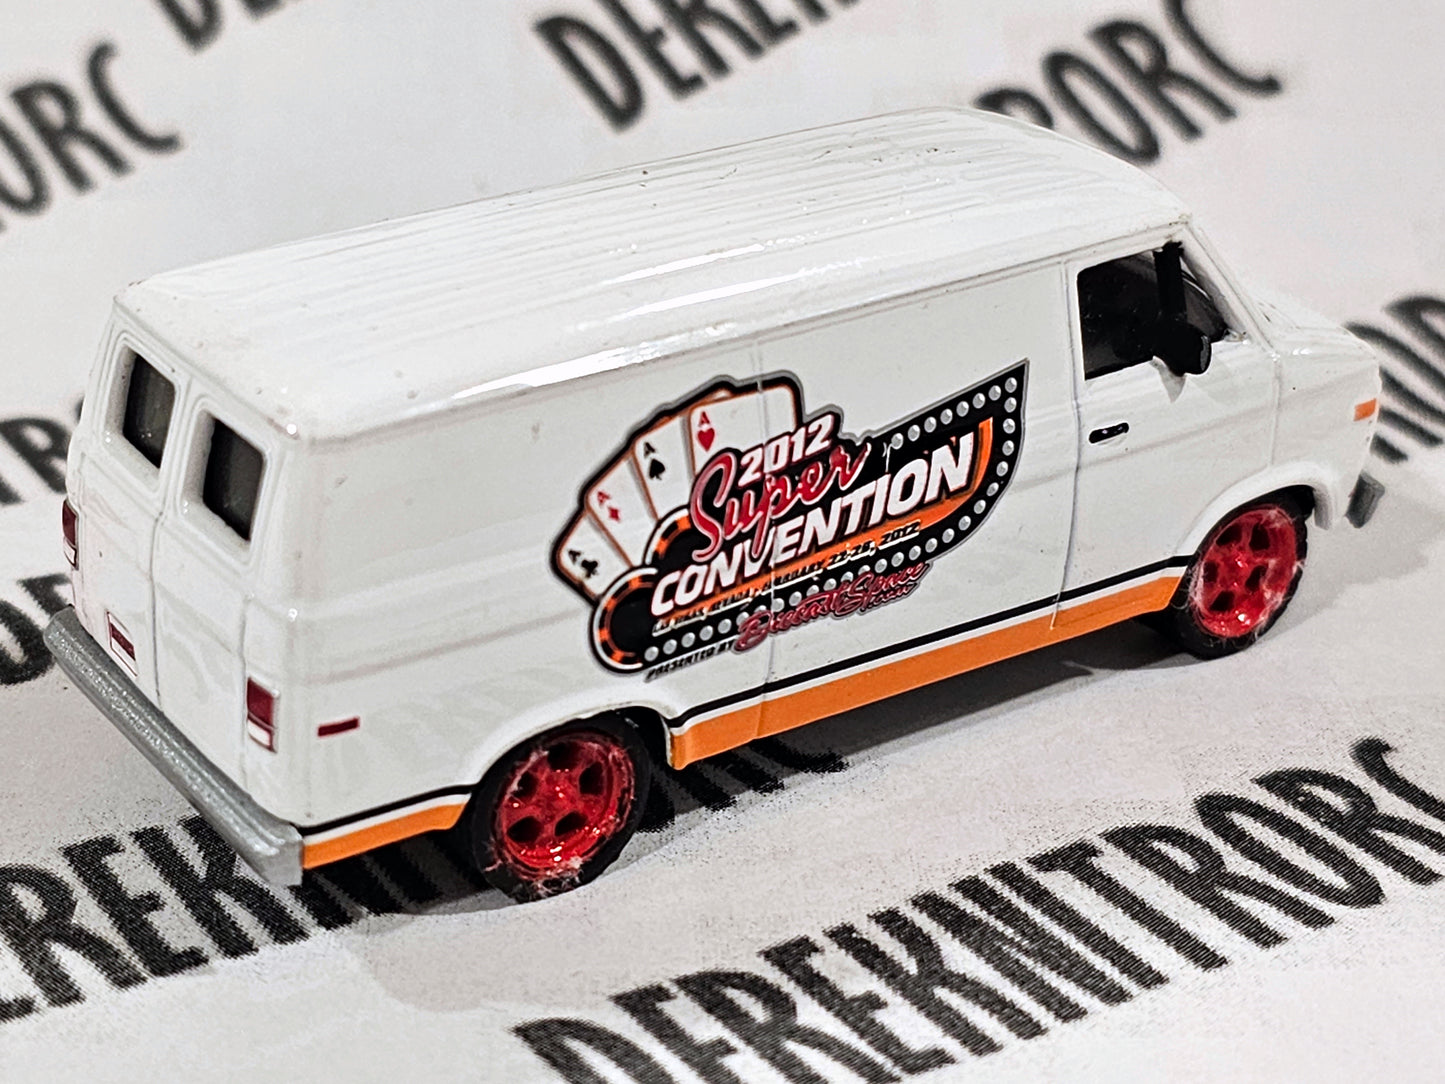 NOT FOR SALE GreenLight Collectibles Deco Sample 1977 Chevrolet G20 Van